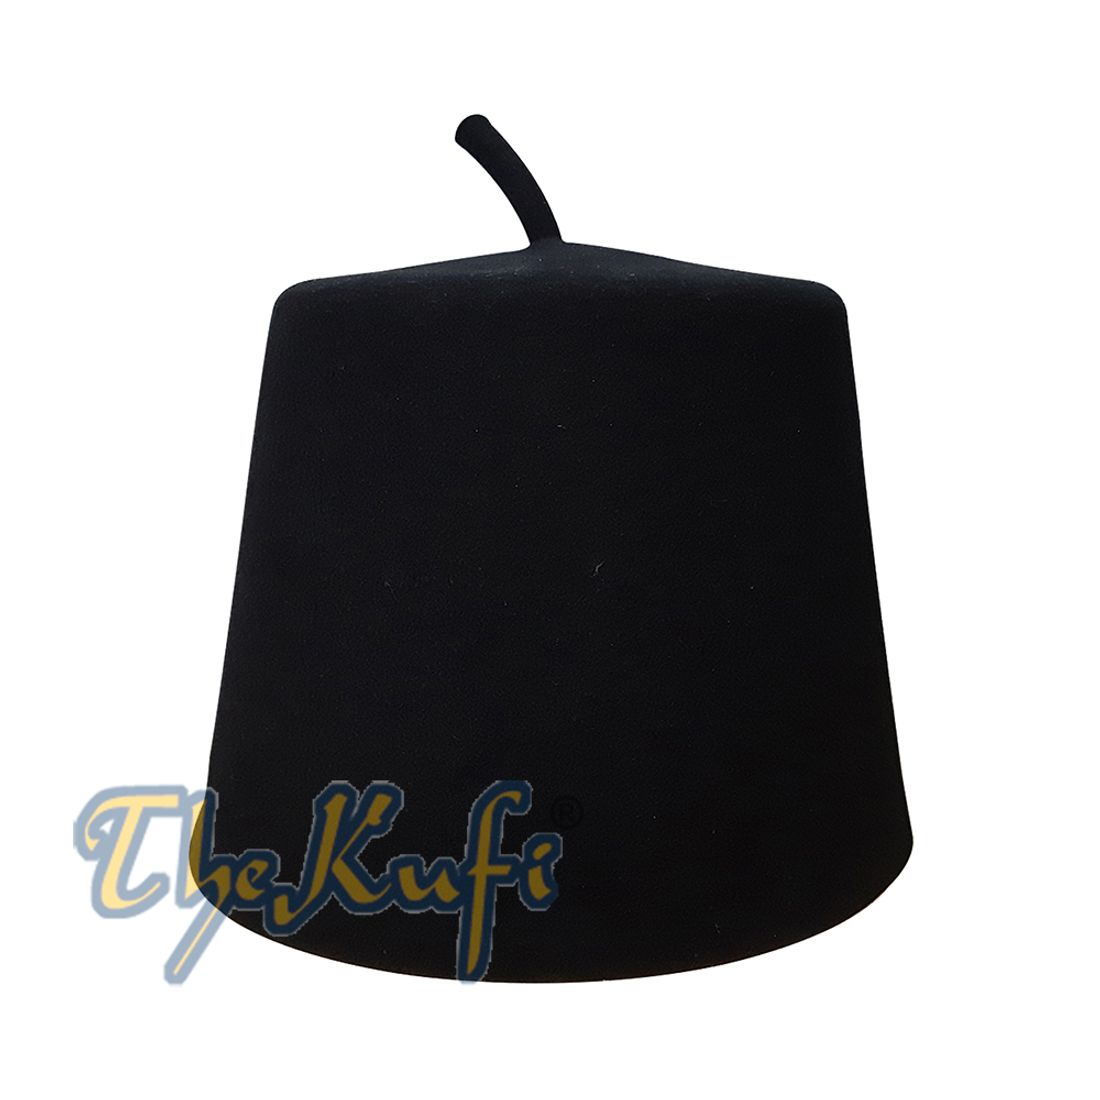 Tall Black Fez Tradition Felt Perforated Tarboosh with Stem